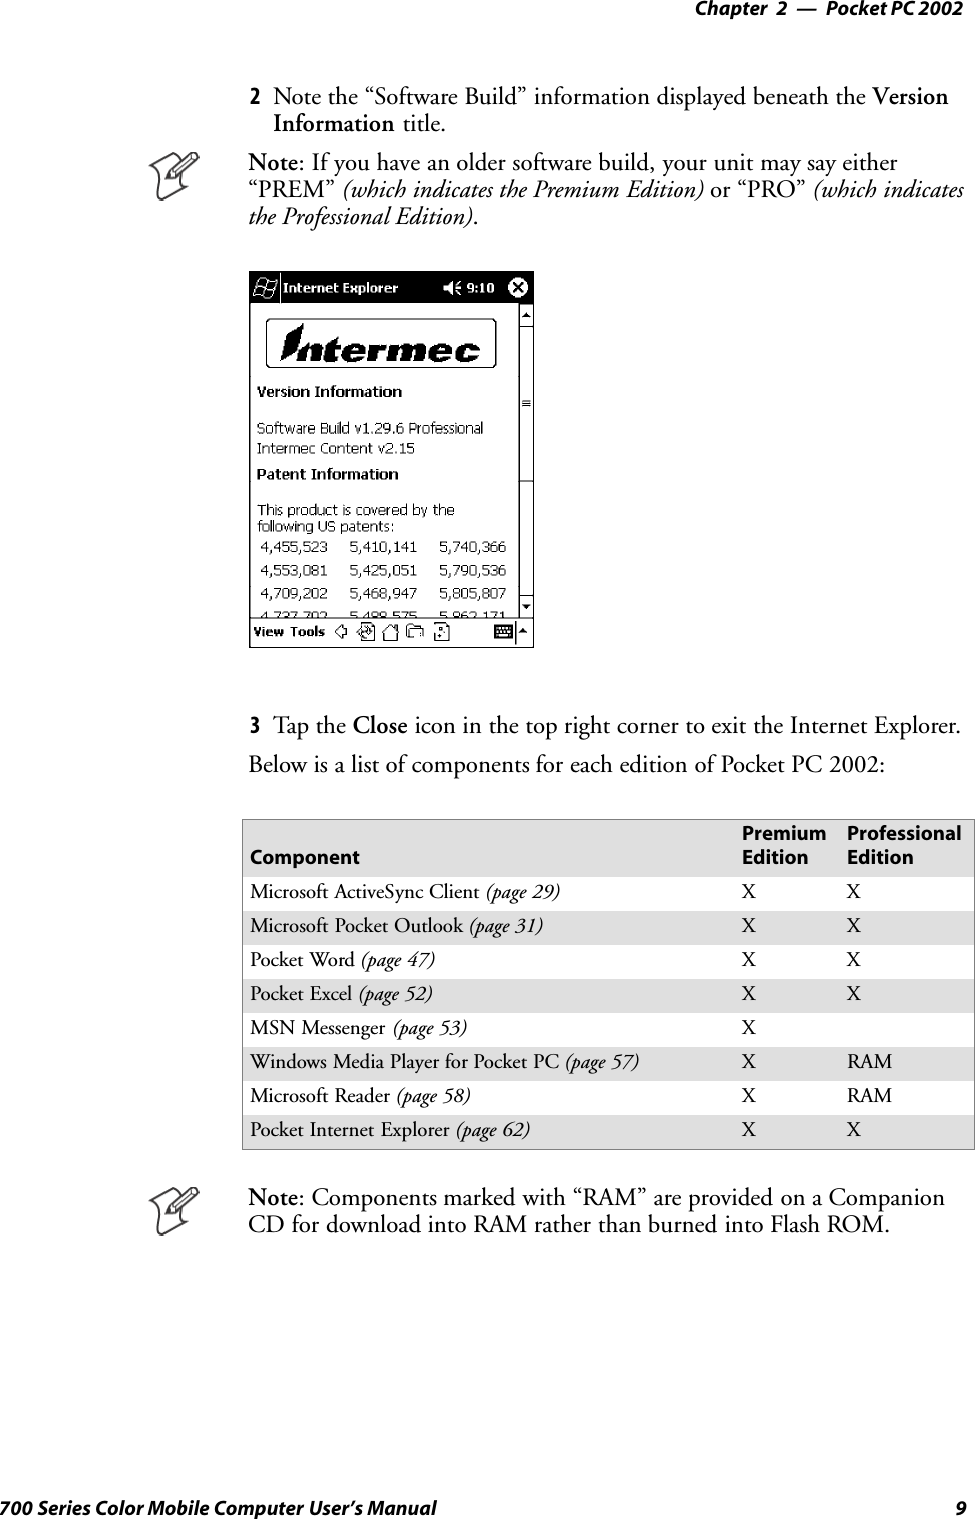 Pocket PC 2002—Chapter 29700 Series Color Mobile Computer User’s Manual2Note the “Software Build” information displayed beneath the VersionInformation title.Note: If you have an older software build, your unit may say either“PREM” (which indicates the Premium Edition) or “PRO” (which indicatesthe Professional Edition).3Tap t he Close icon in the top right corner to exit the Internet Explorer.Below is a list of components for each edition of Pocket PC 2002:ComponentPremiumEditionProfessionalEditionMicrosoft ActiveSync Client (page 29) XXMicrosoft Pocket Outlook (page 31) X XPocket Word (page 47) XXPocket Excel (page 52) X XMSN Messenger (page 53) XWindows Media Player for Pocket PC (page 57) XRAMMicrosoft Reader (page 58) XRAMPocket Internet Explorer (page 62) X XNote: Components marked with “RAM” are provided on a CompanionCD for download into RAM rather than burned into Flash ROM.